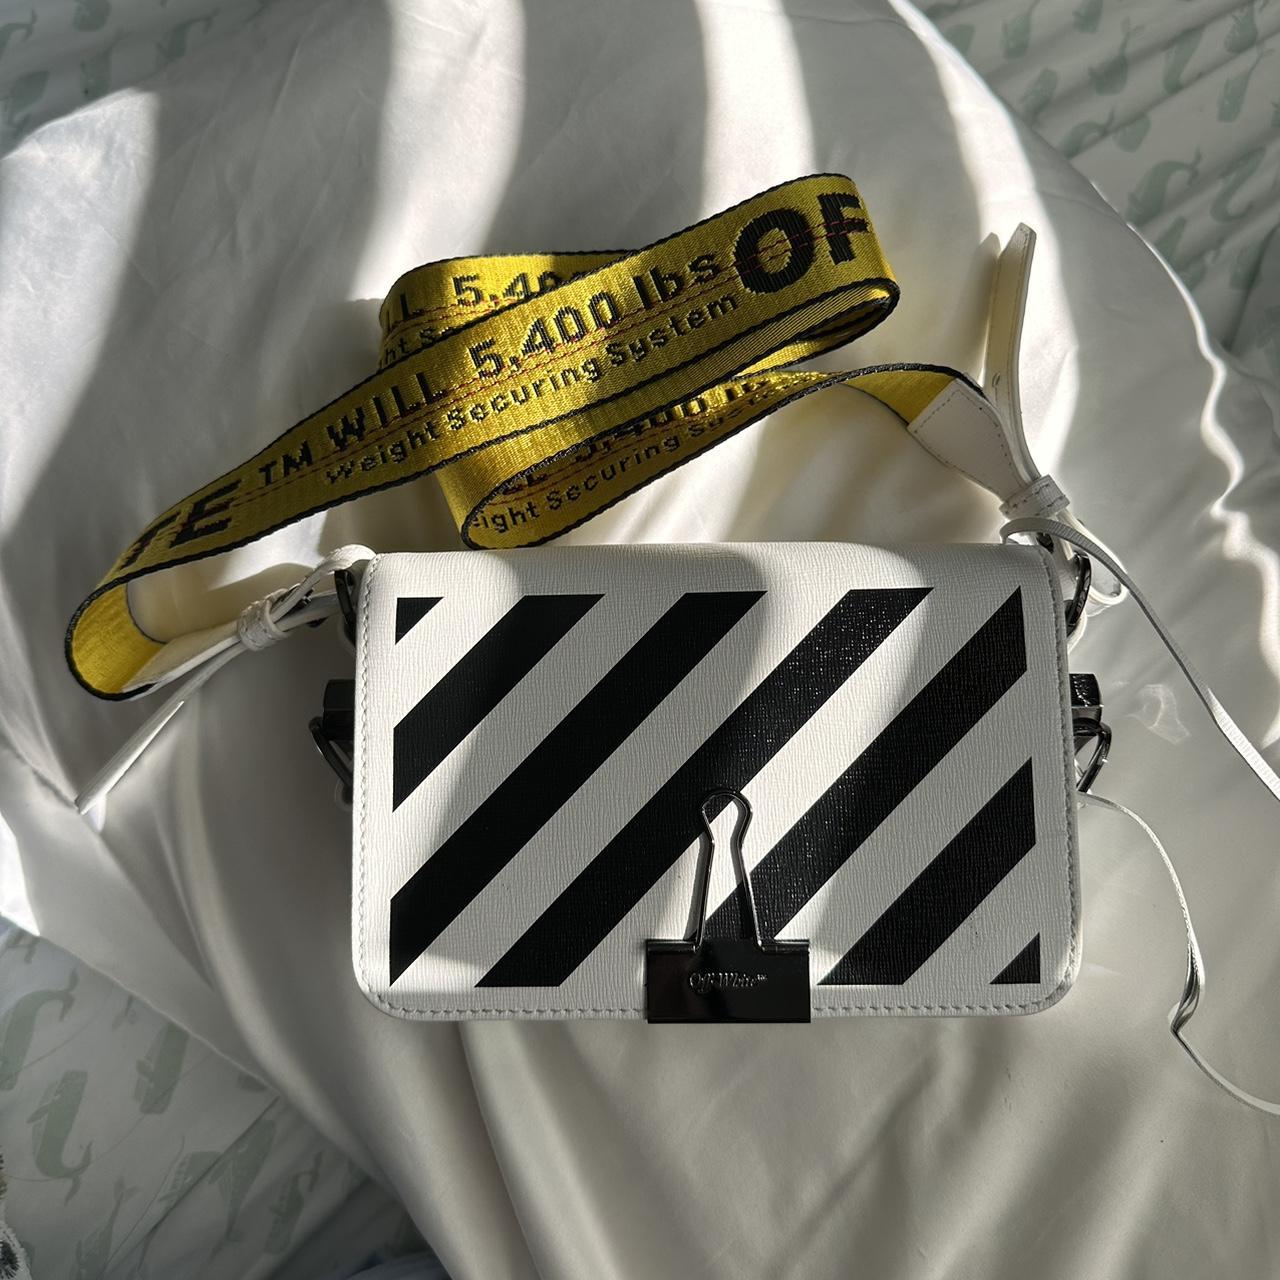 Off-White Women's Small Binder Clip Leather Top Handle Bag